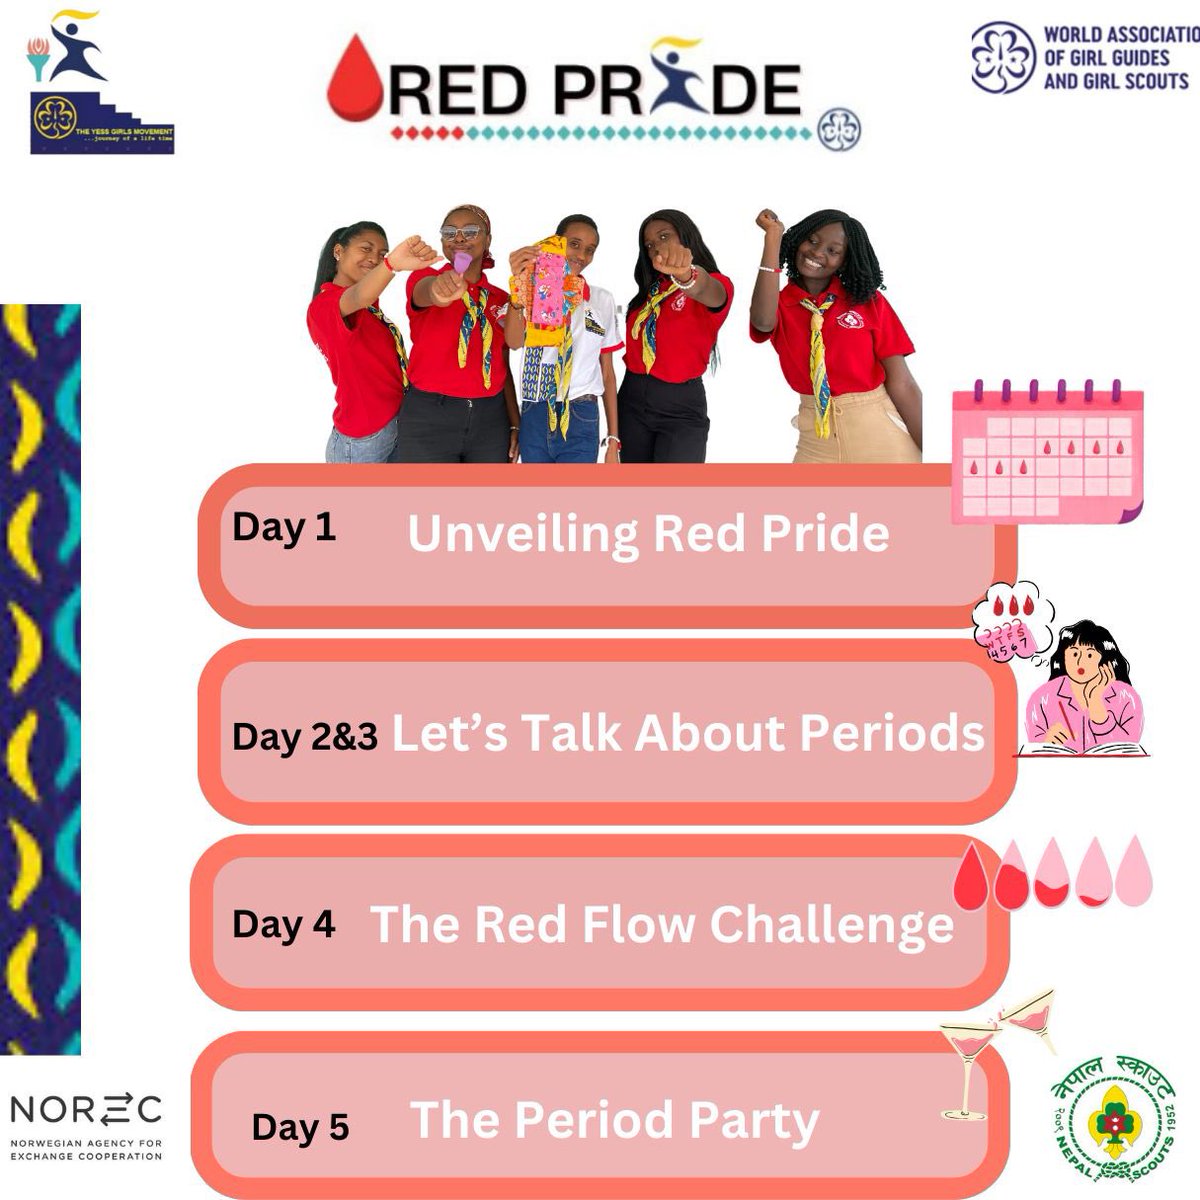 This week we celebrate our Red Pride Week with exciting and engaging activities to promote a period friendlyworld.Follow, like and share! yessgirlsmovement #redpride
#periodfriendlyworld @YessMovement @Norecno @wagggsworld @WAGGGSAsiaPac @africa_region @Nepalscouts